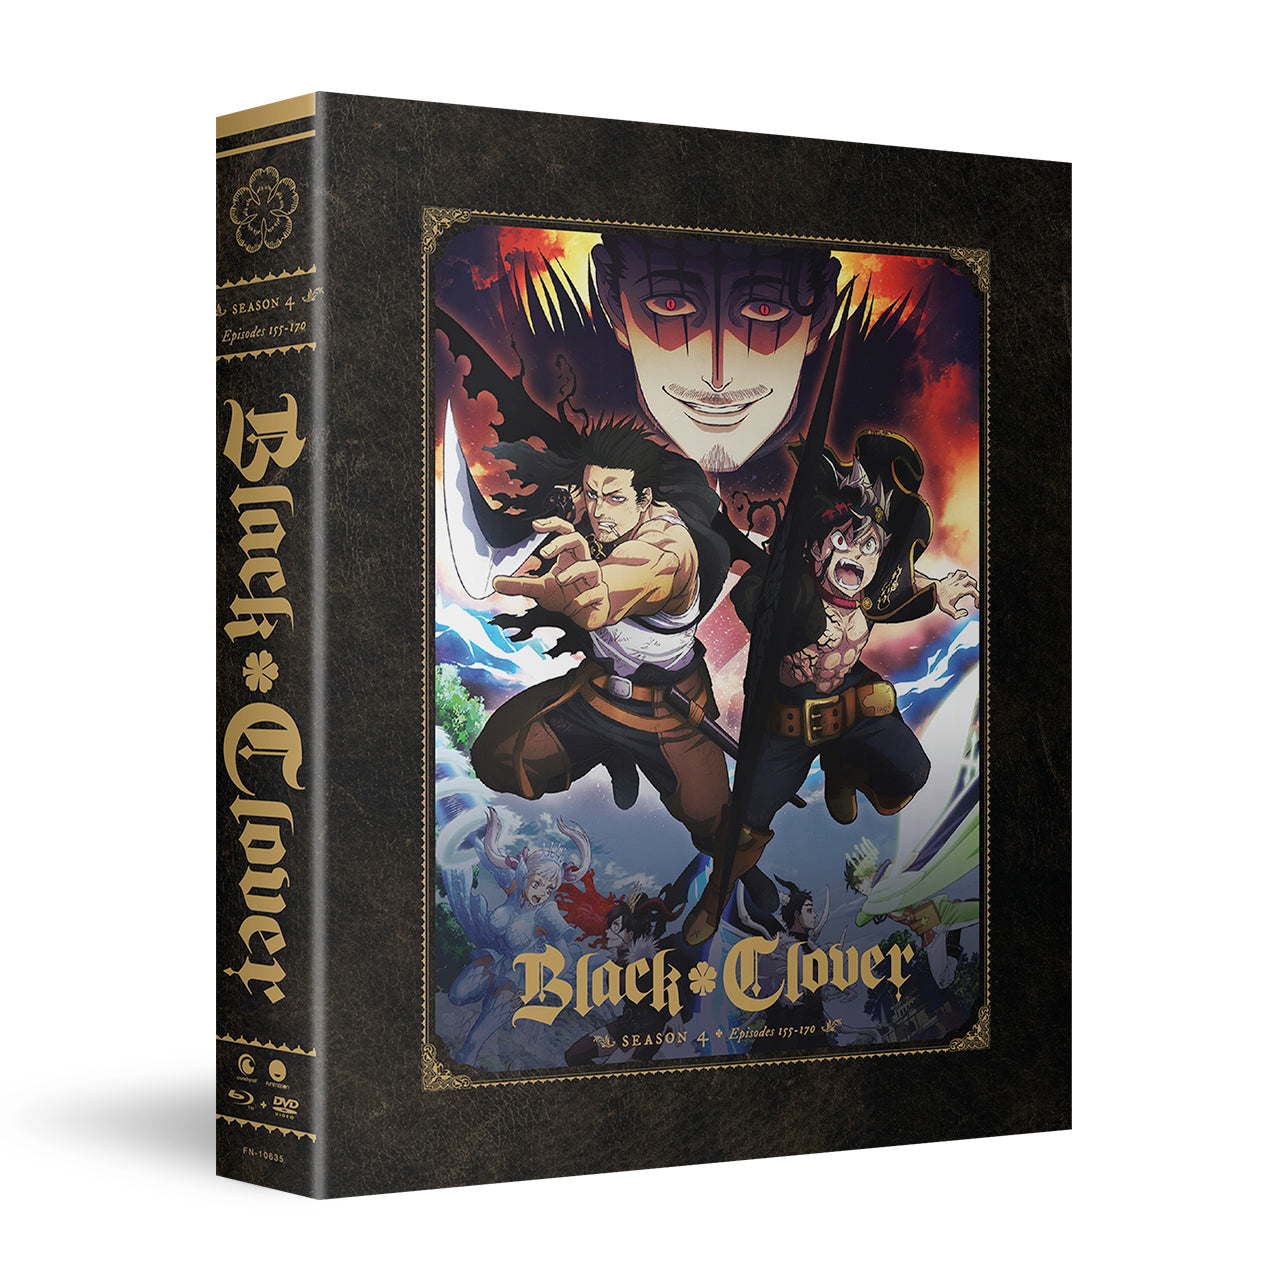 Black Clover - Season 4 - Limited Edition - Blu-ray + DVD image count 2